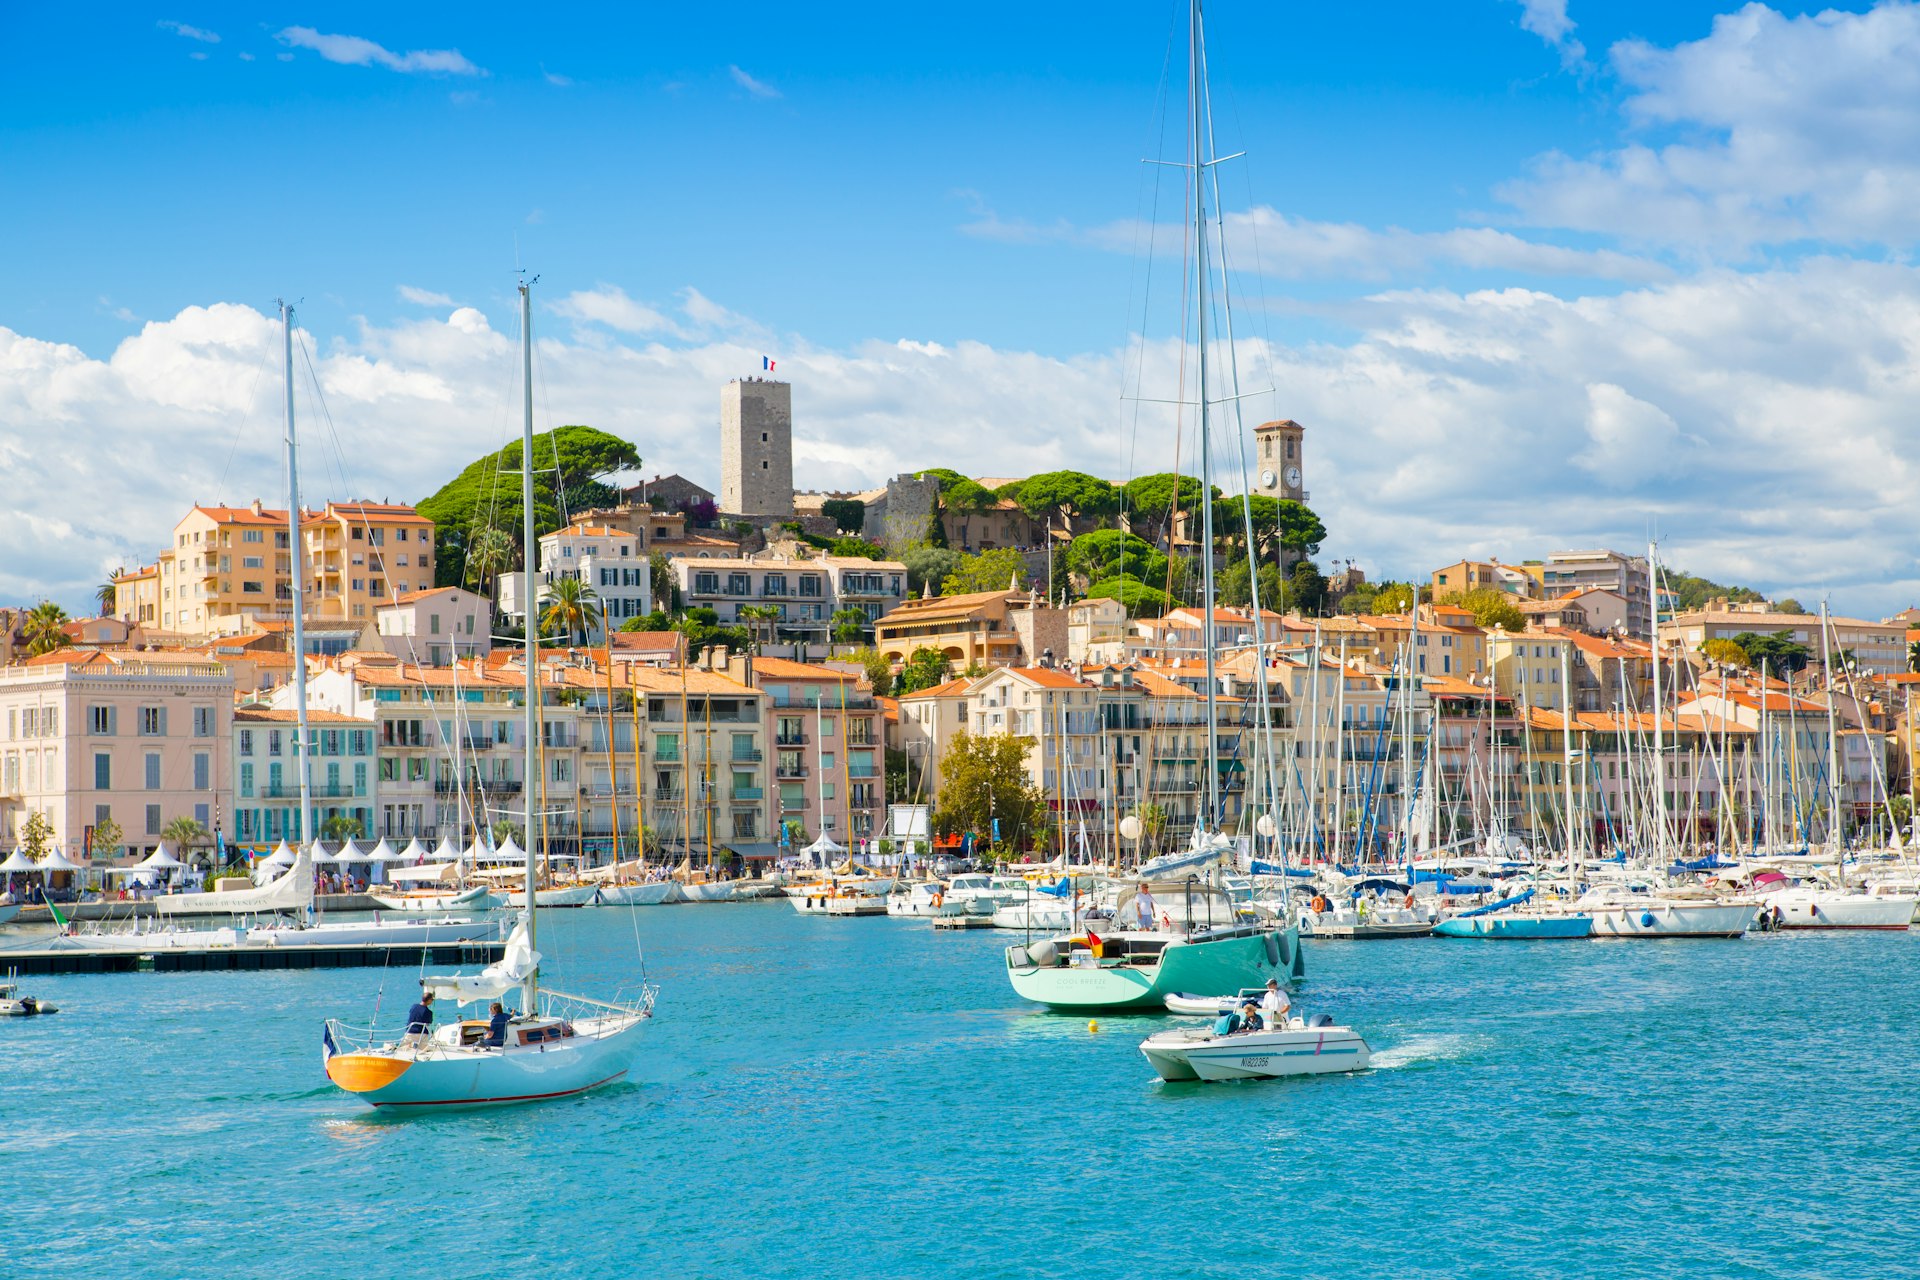 Many small sailing boats are moored in the Port of Cannes, with traditional French houses built up the hill behind